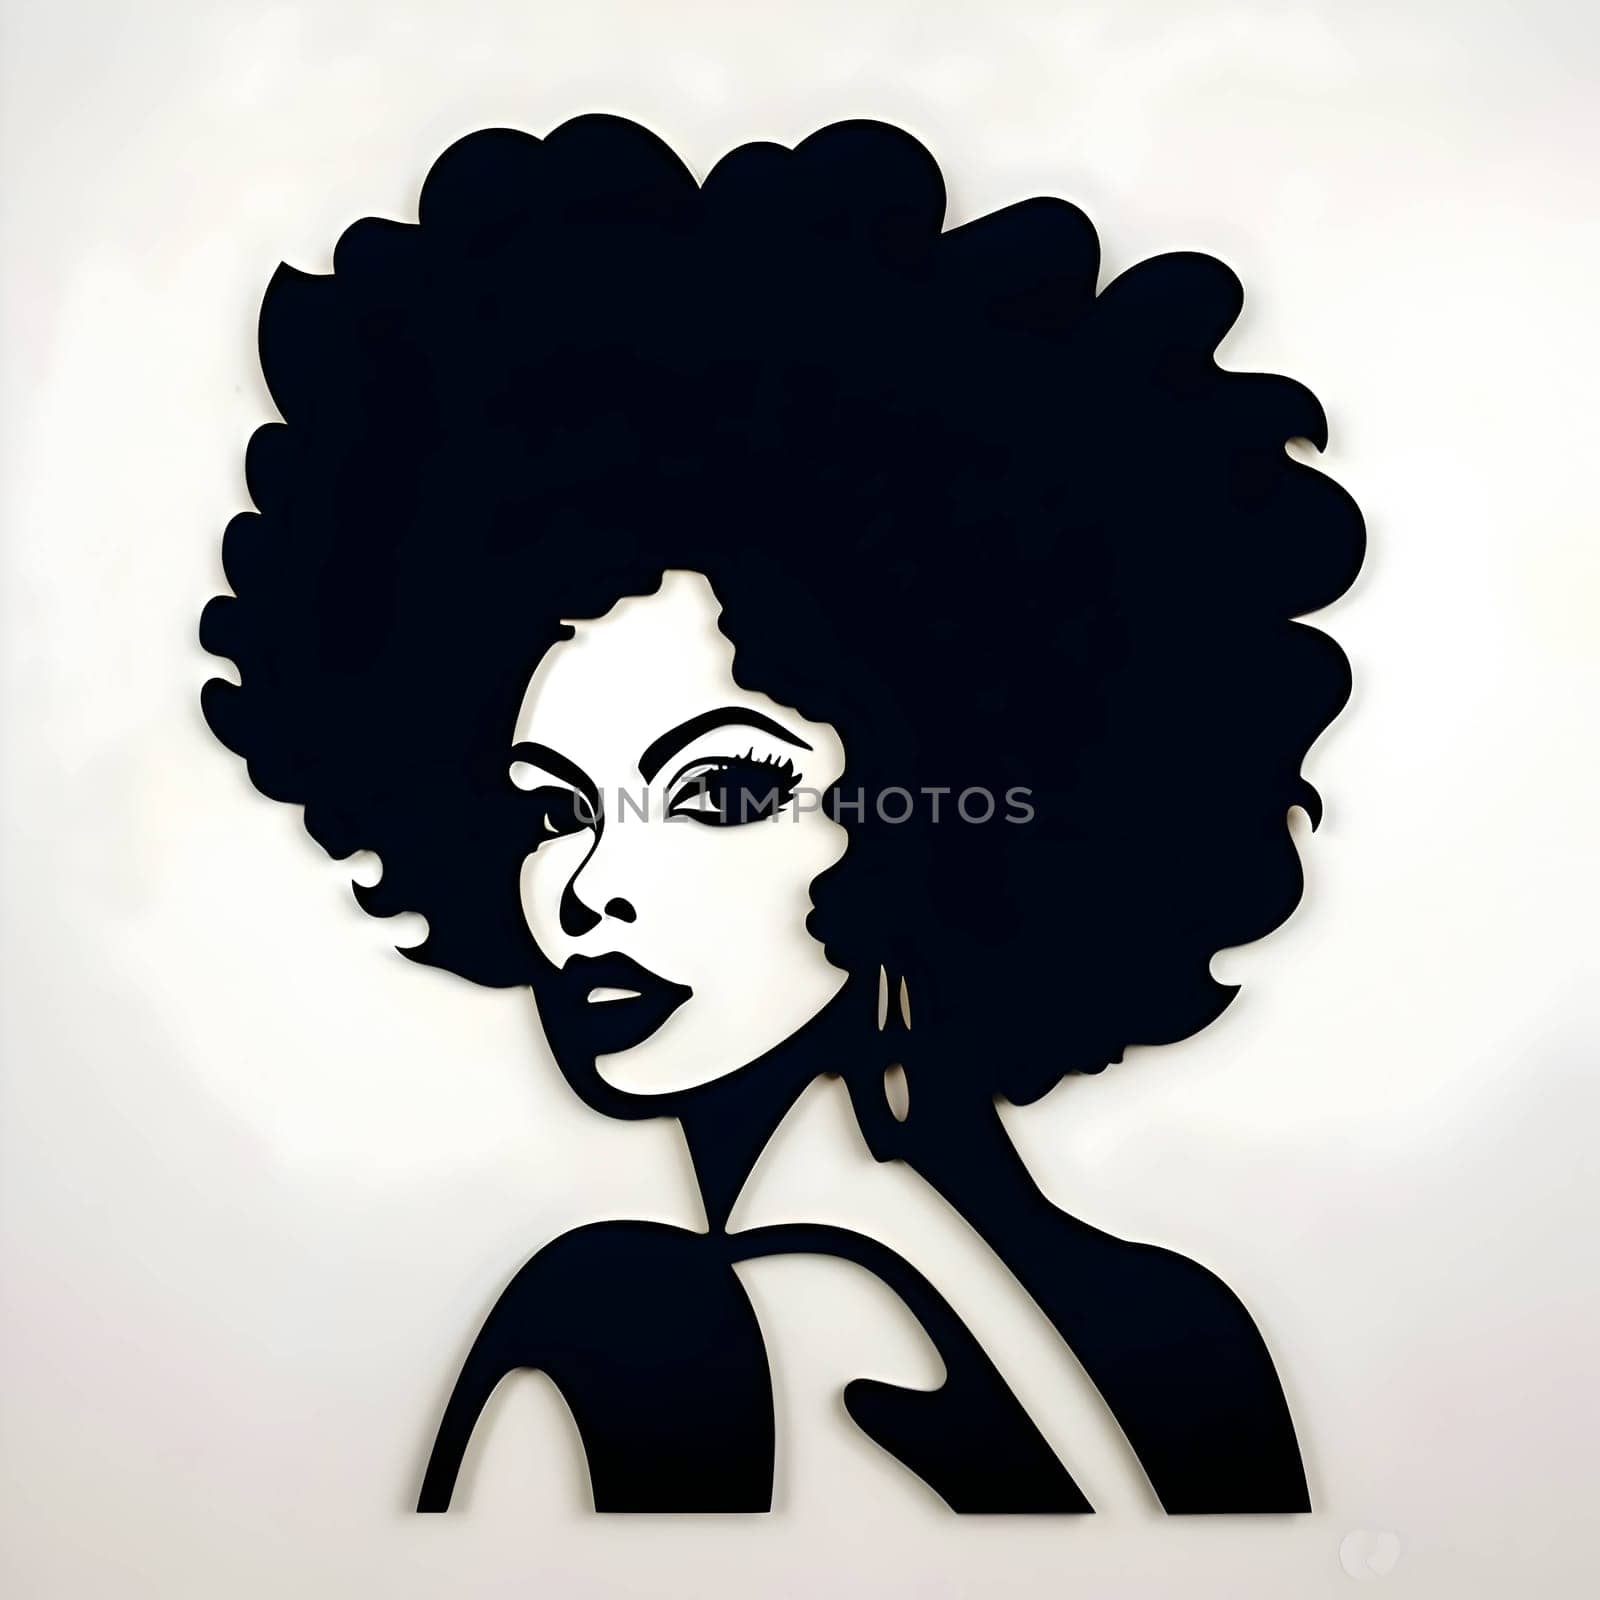 Black silhouette of a woman with afro-textured hair on white background. by ThemesS